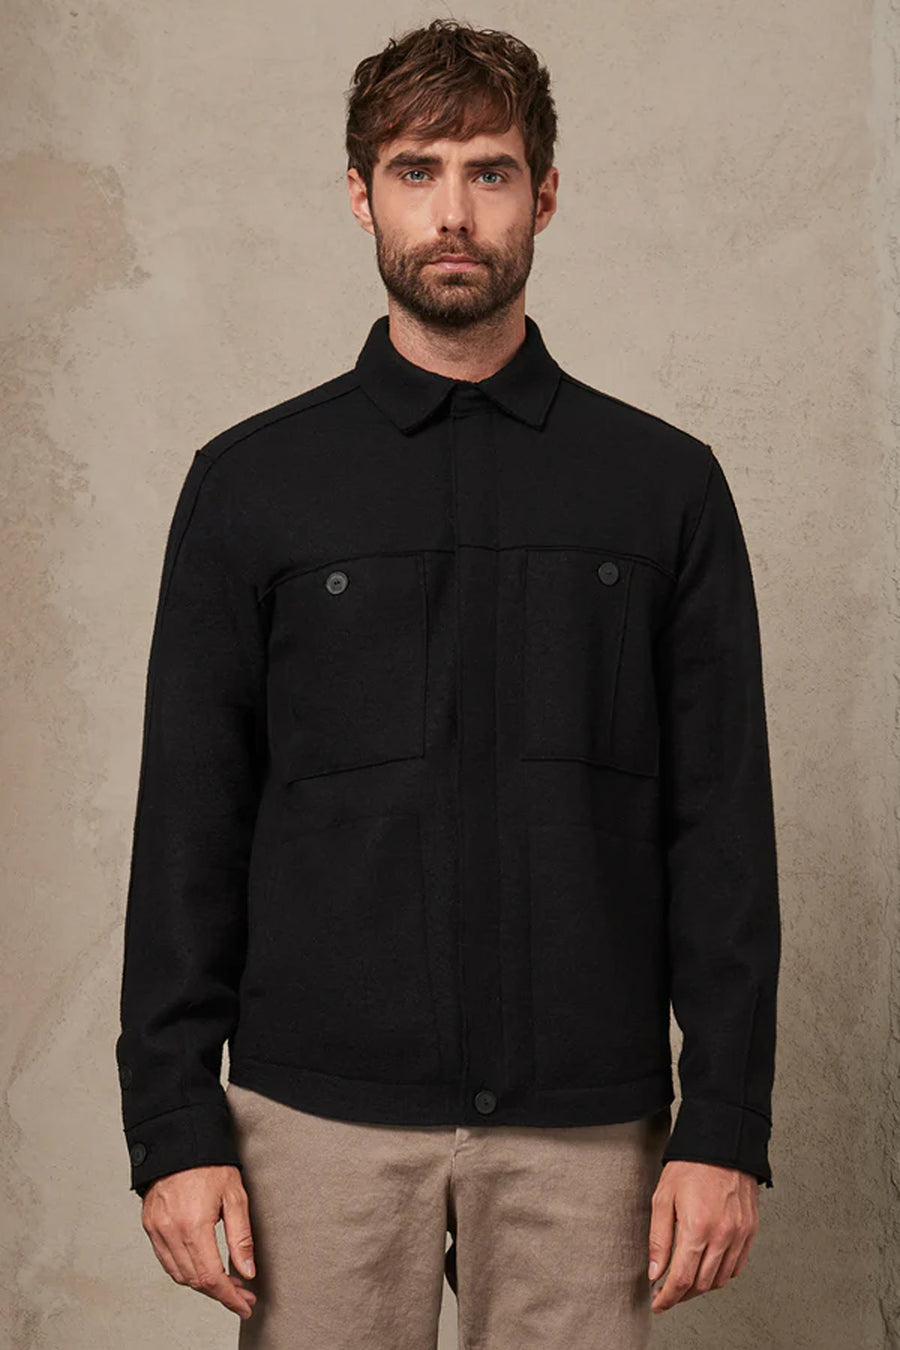 Buy the Transit Zip-Up Wool Overshirt Black at Intro. Spend £50 for free UK delivery. Official stockists. We ship worldwide.